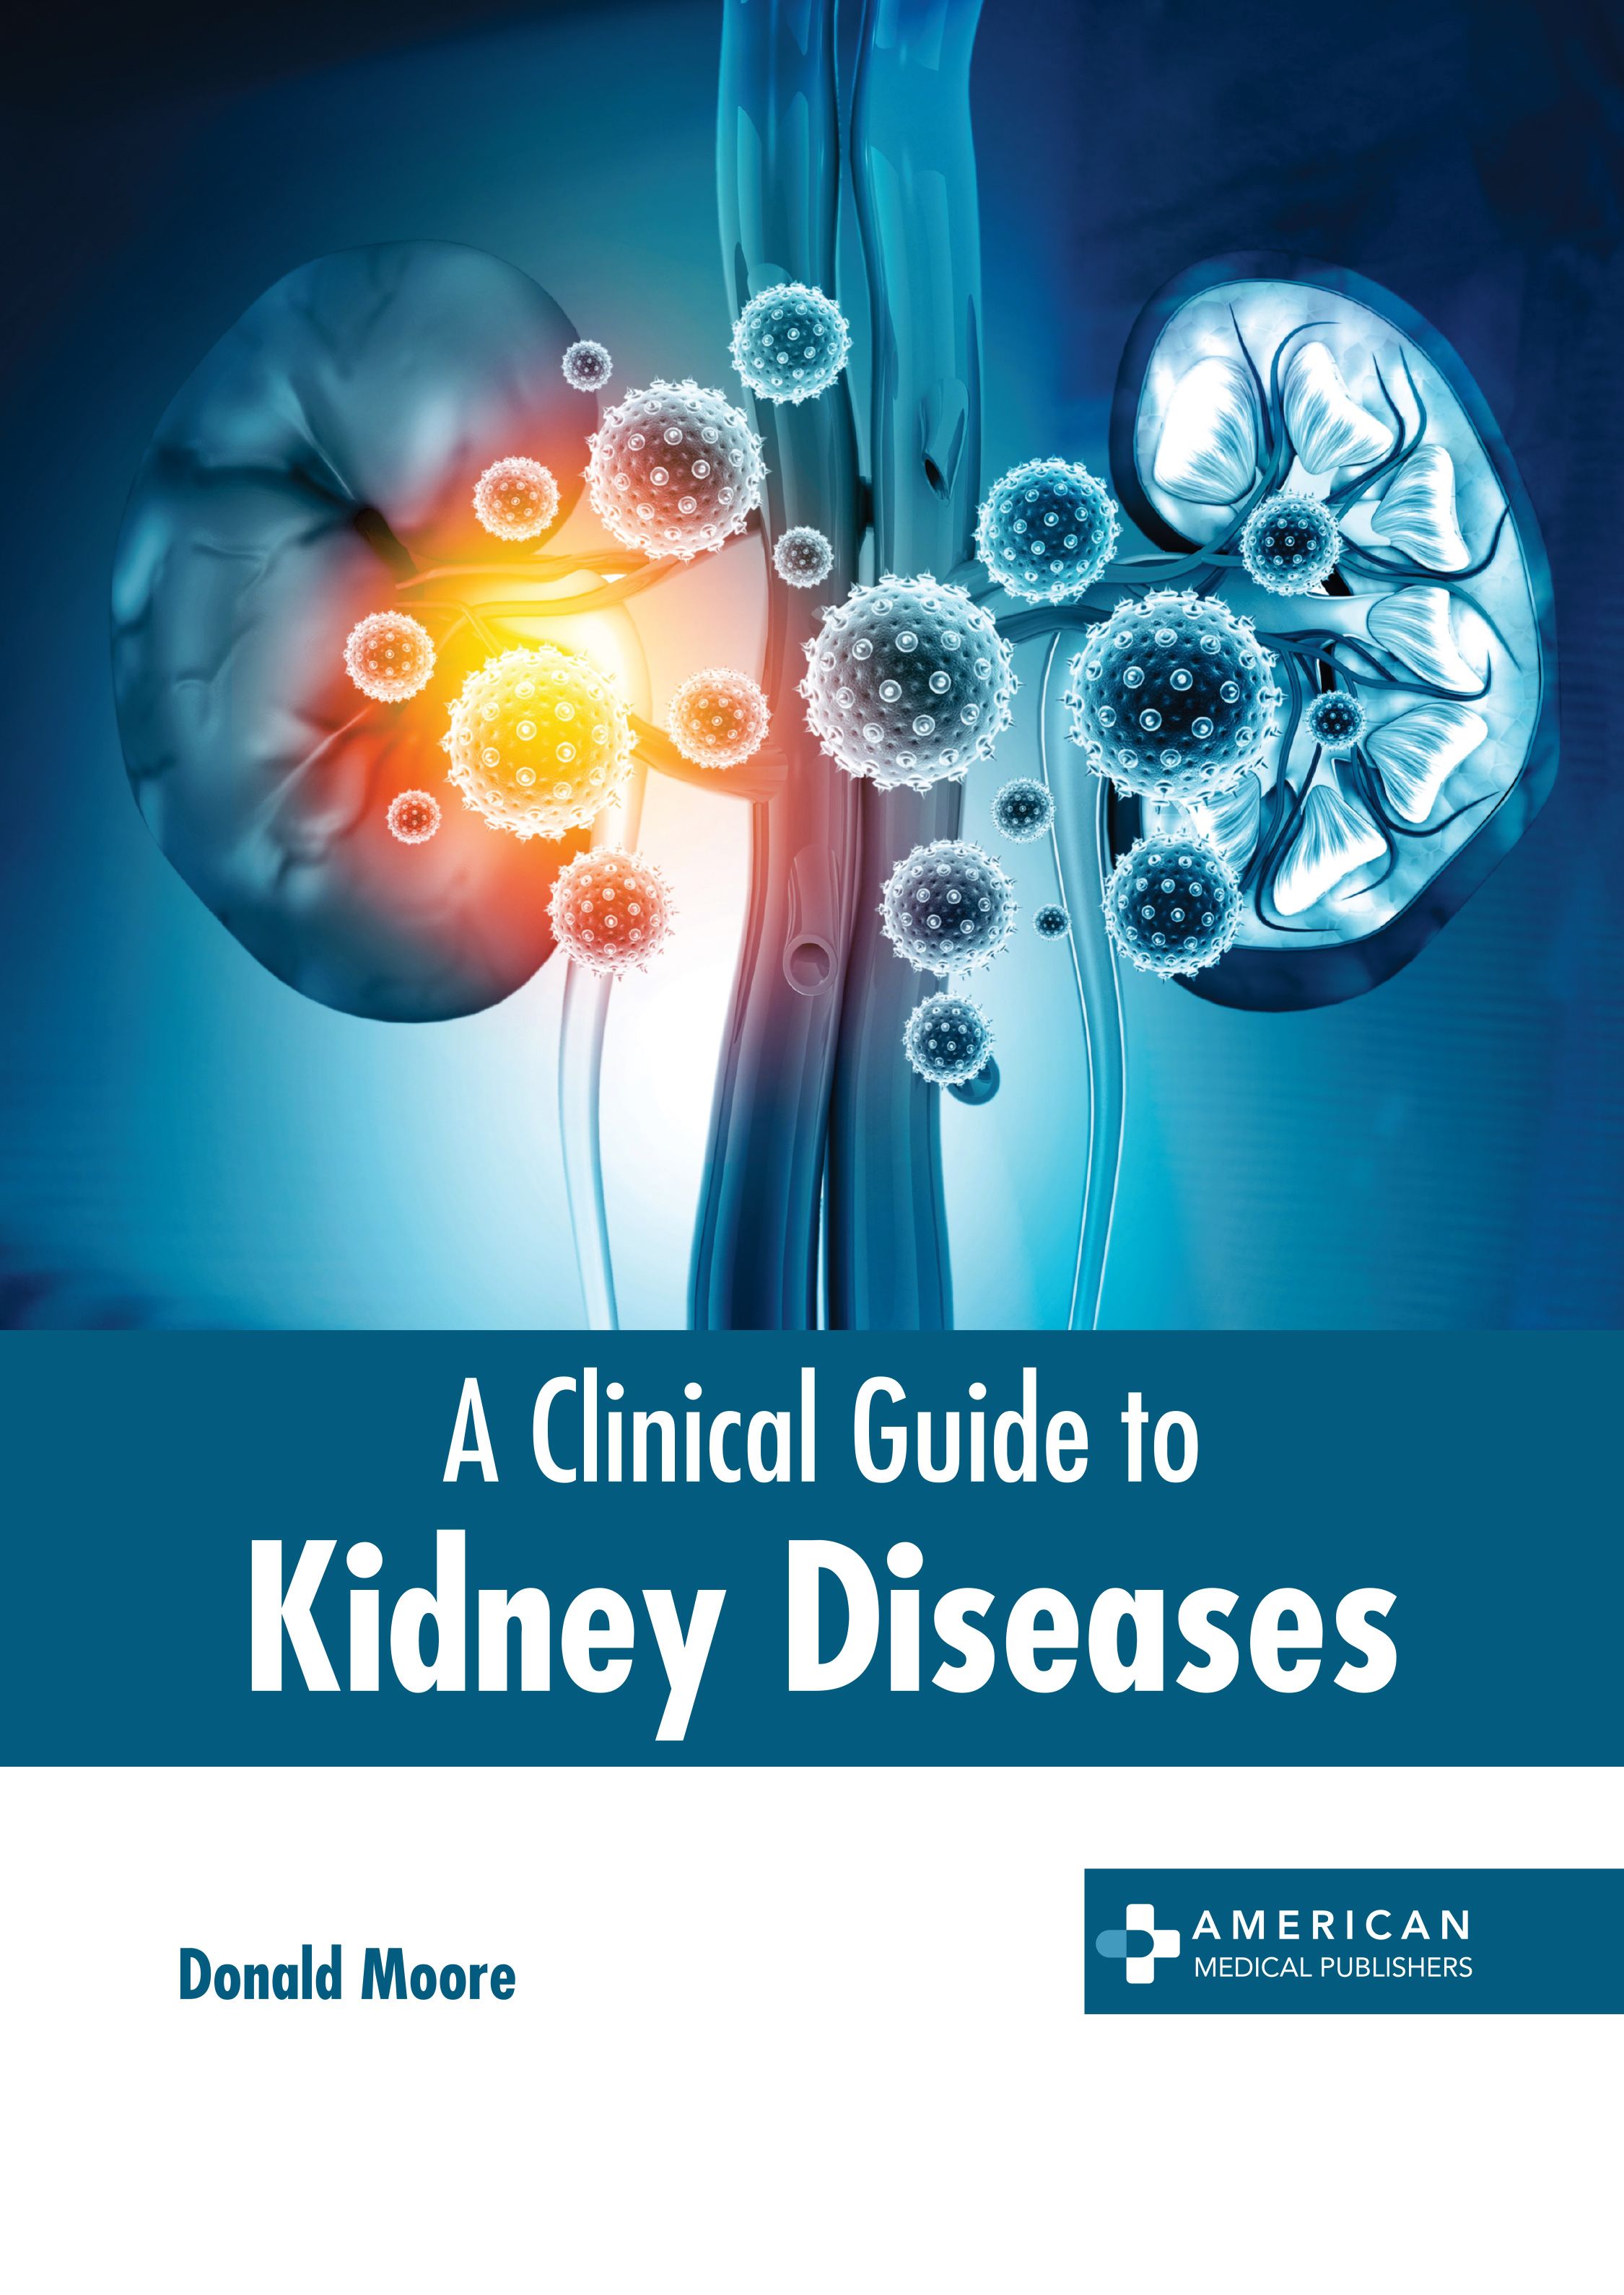 A CLINICAL GUIDE TO KIDNEY DISEASES